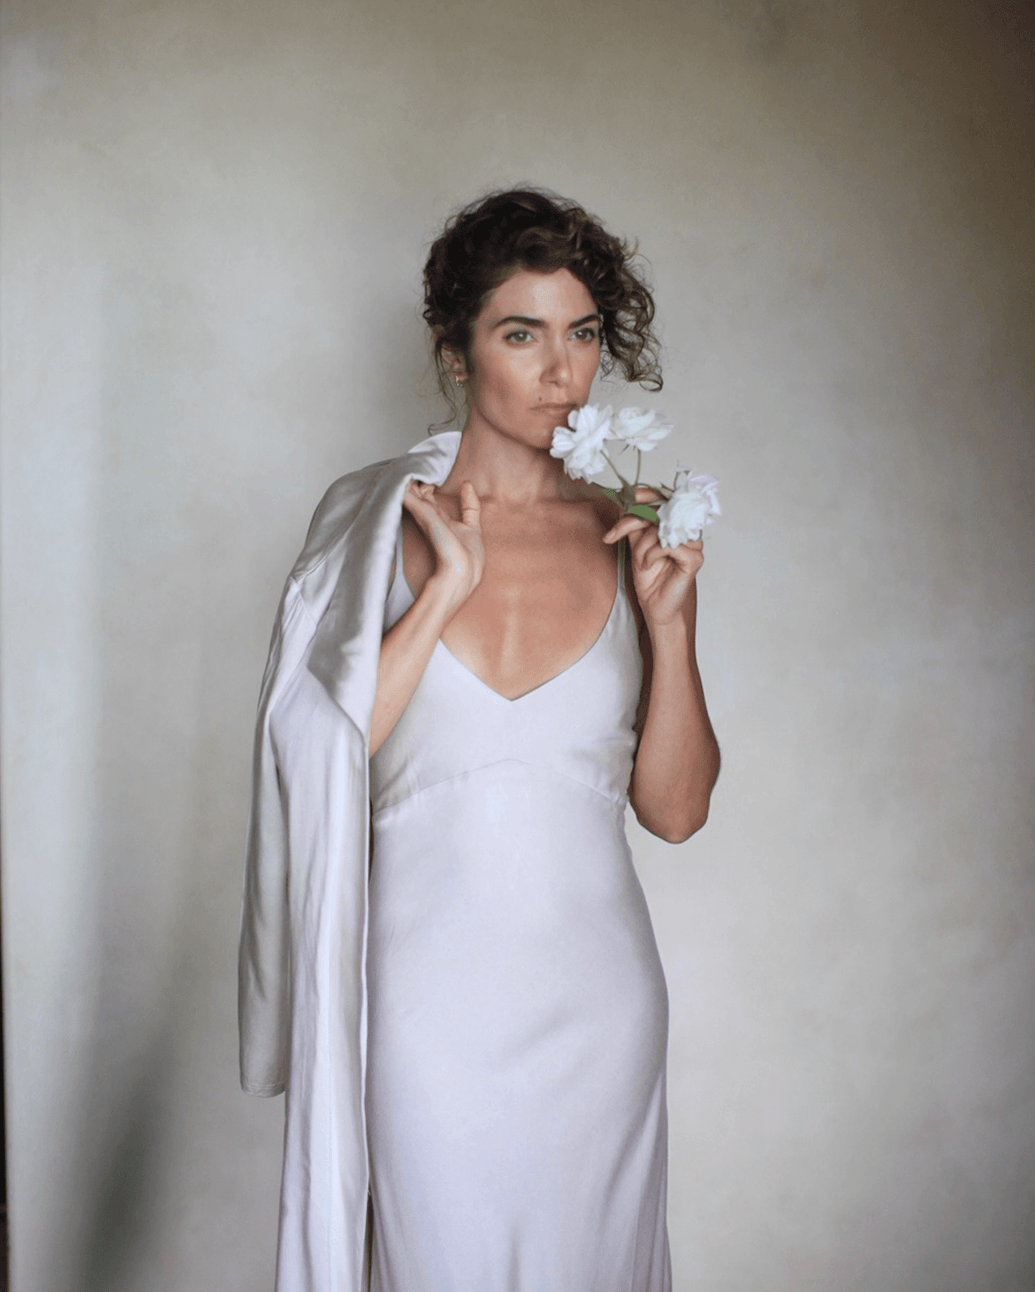 A note about Conscious Fashion vs Fast Fashion from Founder Nikki Reed